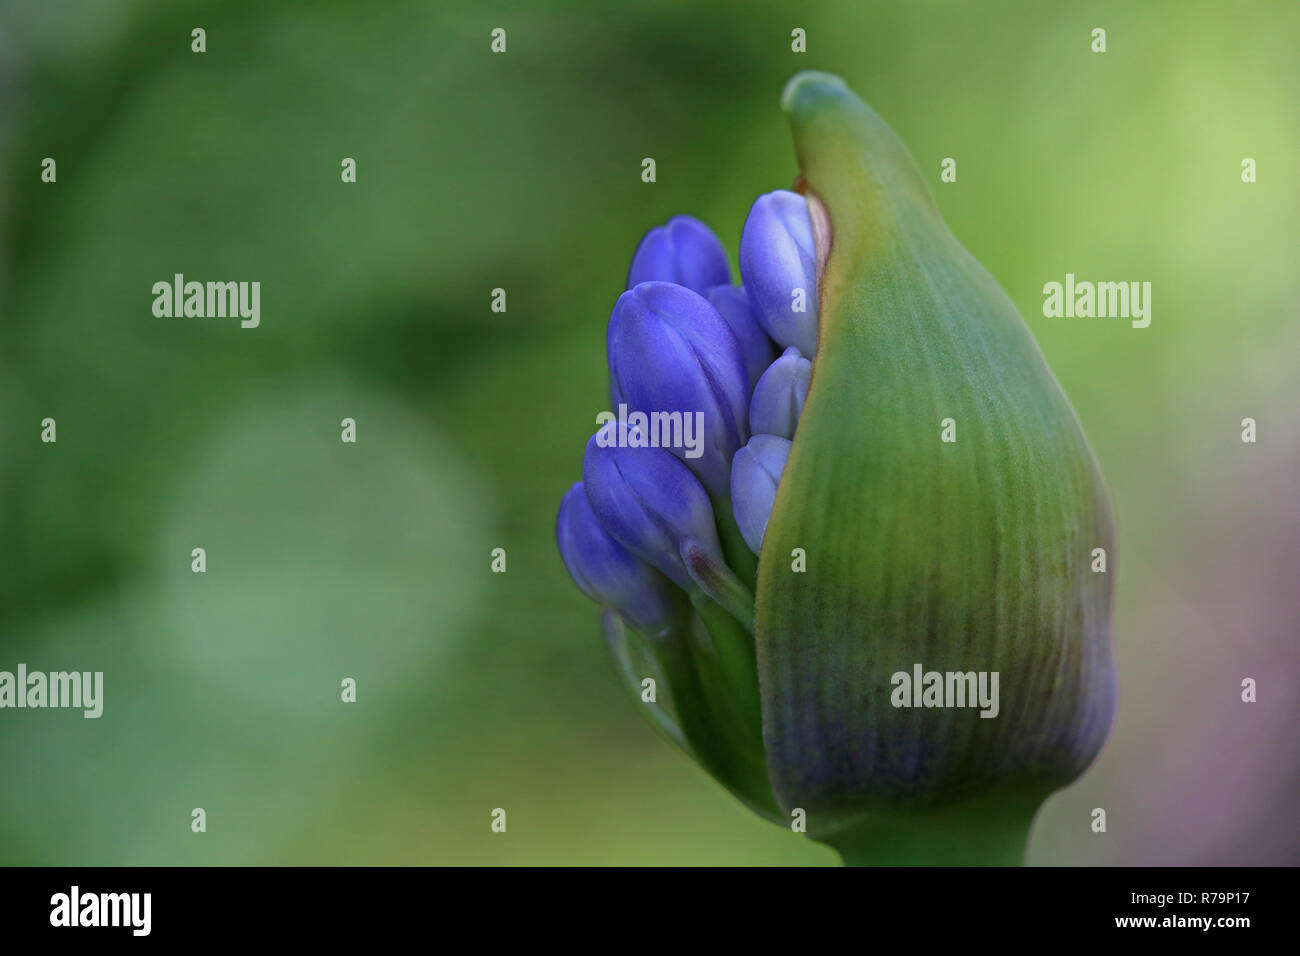 flower bud of the lily agapanthus Stock Photo